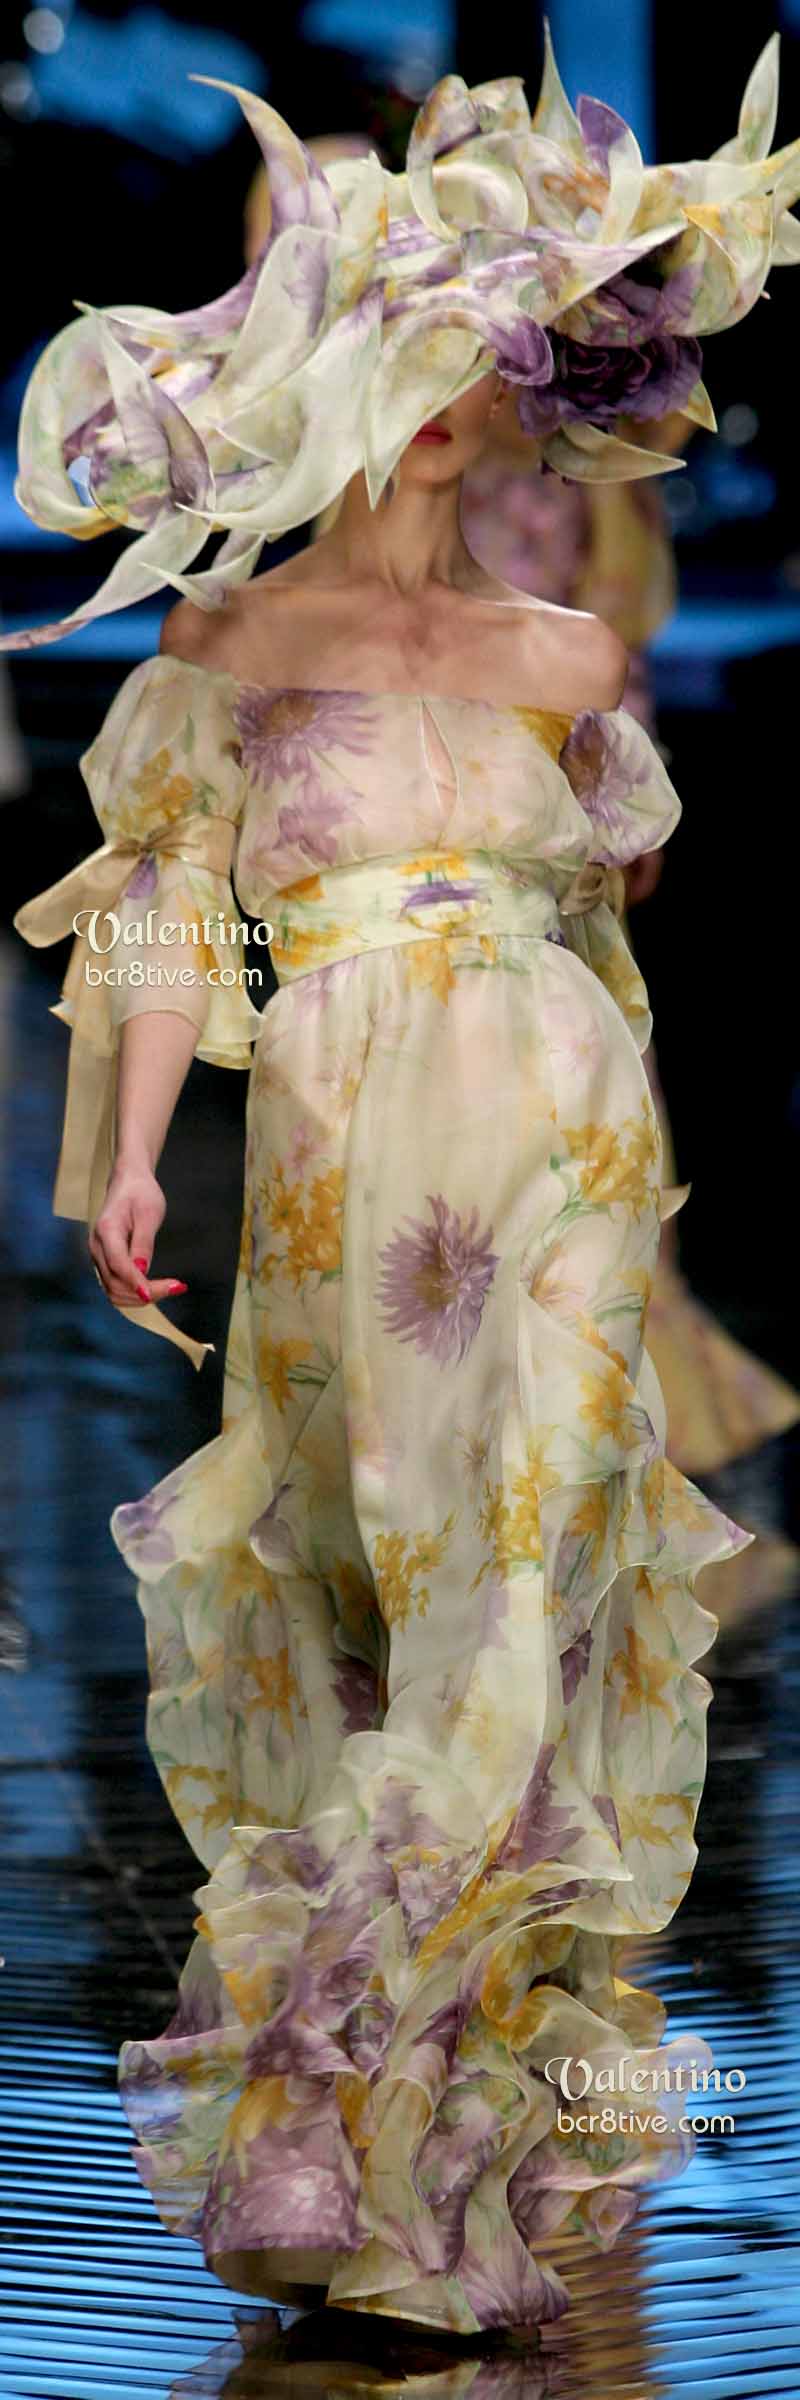 Valentino Floral Gown and Hat